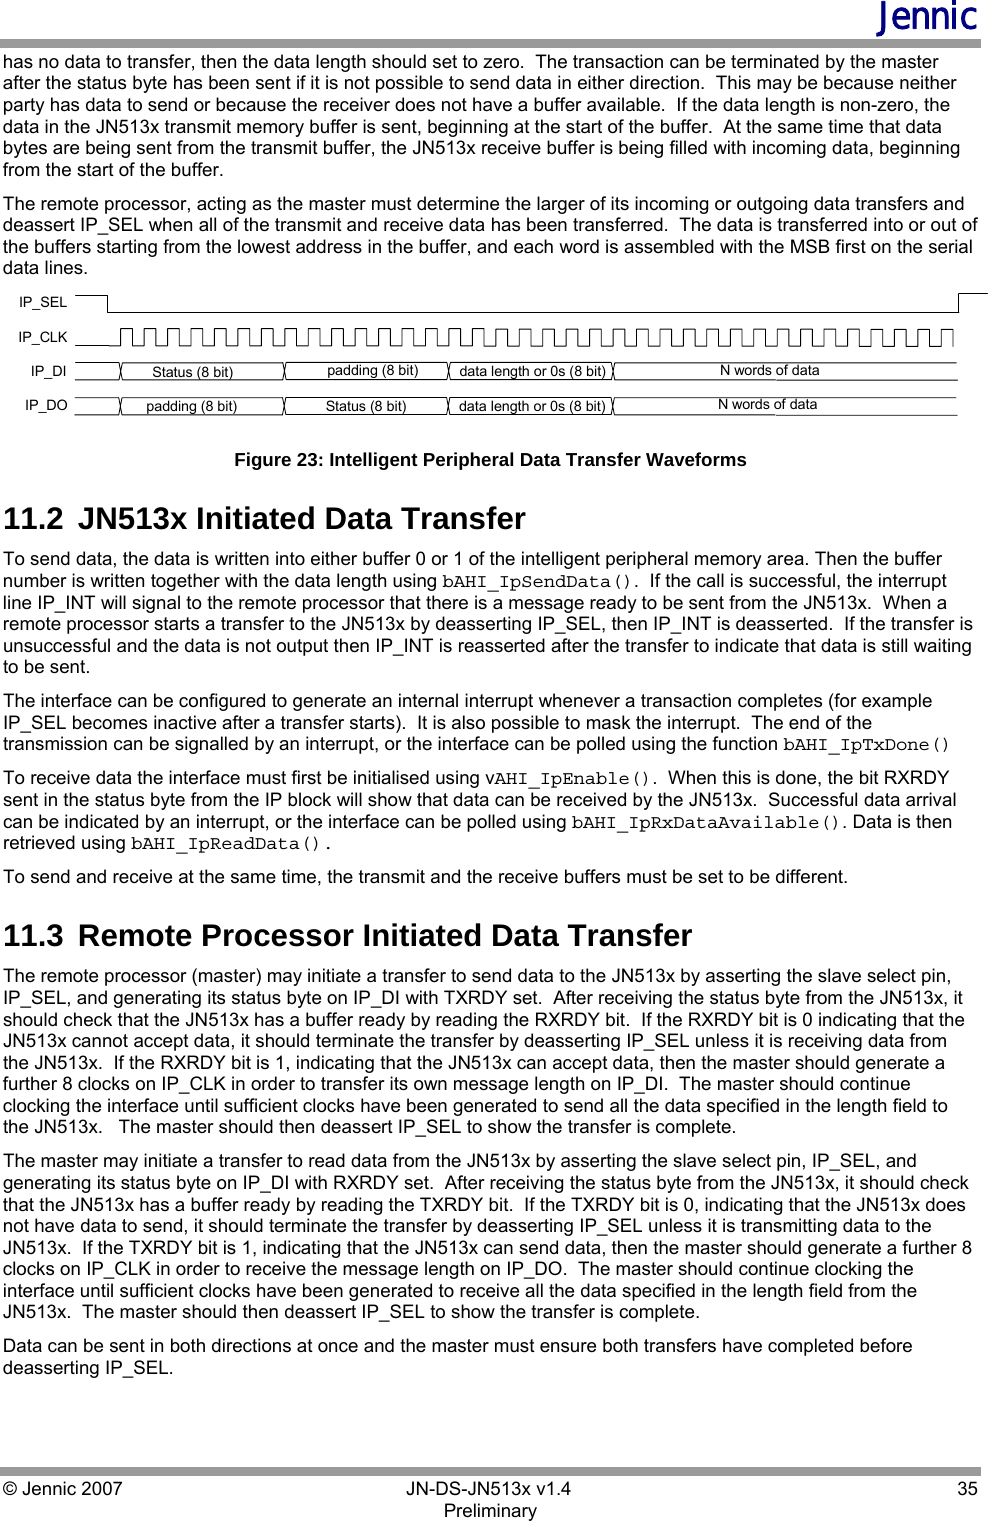 Jennic © Jennic 2007        JN-DS-JN513x v1.4  35 Preliminary has no data to transfer, then the data length should set to zero.  The transaction can be terminated by the master after the status byte has been sent if it is not possible to send data in either direction.  This may be because neither party has data to send or because the receiver does not have a buffer available.  If the data length is non-zero, the data in the JN513x transmit memory buffer is sent, beginning at the start of the buffer.  At the same time that data bytes are being sent from the transmit buffer, the JN513x receive buffer is being filled with incoming data, beginning from the start of the buffer.  The remote processor, acting as the master must determine the larger of its incoming or outgoing data transfers and deassert IP_SEL when all of the transmit and receive data has been transferred.  The data is transferred into or out of the buffers starting from the lowest address in the buffer, and each word is assembled with the MSB first on the serial data lines. IP_SELIP_CLKIP_DI Status (8 bit)  N words of dataIP_DOdata length or 0s (8 bit)Status (8 bit) N words of datadata length or 0s (8 bit)padding (8 bit)padding (8 bit)Figure 23: Intelligent Peripheral Data Transfer Waveforms 11.2  JN513x Initiated Data Transfer To send data, the data is written into either buffer 0 or 1 of the intelligent peripheral memory area. Then the buffer number is written together with the data length using bAHI_IpSendData().  If the call is successful, the interrupt line IP_INT will signal to the remote processor that there is a message ready to be sent from the JN513x.  When a remote processor starts a transfer to the JN513x by deasserting IP_SEL, then IP_INT is deasserted.  If the transfer is unsuccessful and the data is not output then IP_INT is reasserted after the transfer to indicate that data is still waiting to be sent. The interface can be configured to generate an internal interrupt whenever a transaction completes (for example IP_SEL becomes inactive after a transfer starts).  It is also possible to mask the interrupt.  The end of the transmission can be signalled by an interrupt, or the interface can be polled using the function bAHI_IpTxDone() To receive data the interface must first be initialised using vAHI_IpEnable().  When this is done, the bit RXRDY sent in the status byte from the IP block will show that data can be received by the JN513x.  Successful data arrival can be indicated by an interrupt, or the interface can be polled using bAHI_IpRxDataAvailable(). Data is then retrieved using bAHI_IpReadData(). To send and receive at the same time, the transmit and the receive buffers must be set to be different. 11.3  Remote Processor Initiated Data Transfer The remote processor (master) may initiate a transfer to send data to the JN513x by asserting the slave select pin, IP_SEL, and generating its status byte on IP_DI with TXRDY set.  After receiving the status byte from the JN513x, it should check that the JN513x has a buffer ready by reading the RXRDY bit.  If the RXRDY bit is 0 indicating that the JN513x cannot accept data, it should terminate the transfer by deasserting IP_SEL unless it is receiving data from the JN513x.  If the RXRDY bit is 1, indicating that the JN513x can accept data, then the master should generate a further 8 clocks on IP_CLK in order to transfer its own message length on IP_DI.  The master should continue clocking the interface until sufficient clocks have been generated to send all the data specified in the length field to the JN513x.   The master should then deassert IP_SEL to show the transfer is complete. The master may initiate a transfer to read data from the JN513x by asserting the slave select pin, IP_SEL, and generating its status byte on IP_DI with RXRDY set.  After receiving the status byte from the JN513x, it should check that the JN513x has a buffer ready by reading the TXRDY bit.  If the TXRDY bit is 0, indicating that the JN513x does not have data to send, it should terminate the transfer by deasserting IP_SEL unless it is transmitting data to the JN513x.  If the TXRDY bit is 1, indicating that the JN513x can send data, then the master should generate a further 8 clocks on IP_CLK in order to receive the message length on IP_DO.  The master should continue clocking the interface until sufficient clocks have been generated to receive all the data specified in the length field from the JN513x.  The master should then deassert IP_SEL to show the transfer is complete. Data can be sent in both directions at once and the master must ensure both transfers have completed before deasserting IP_SEL. 